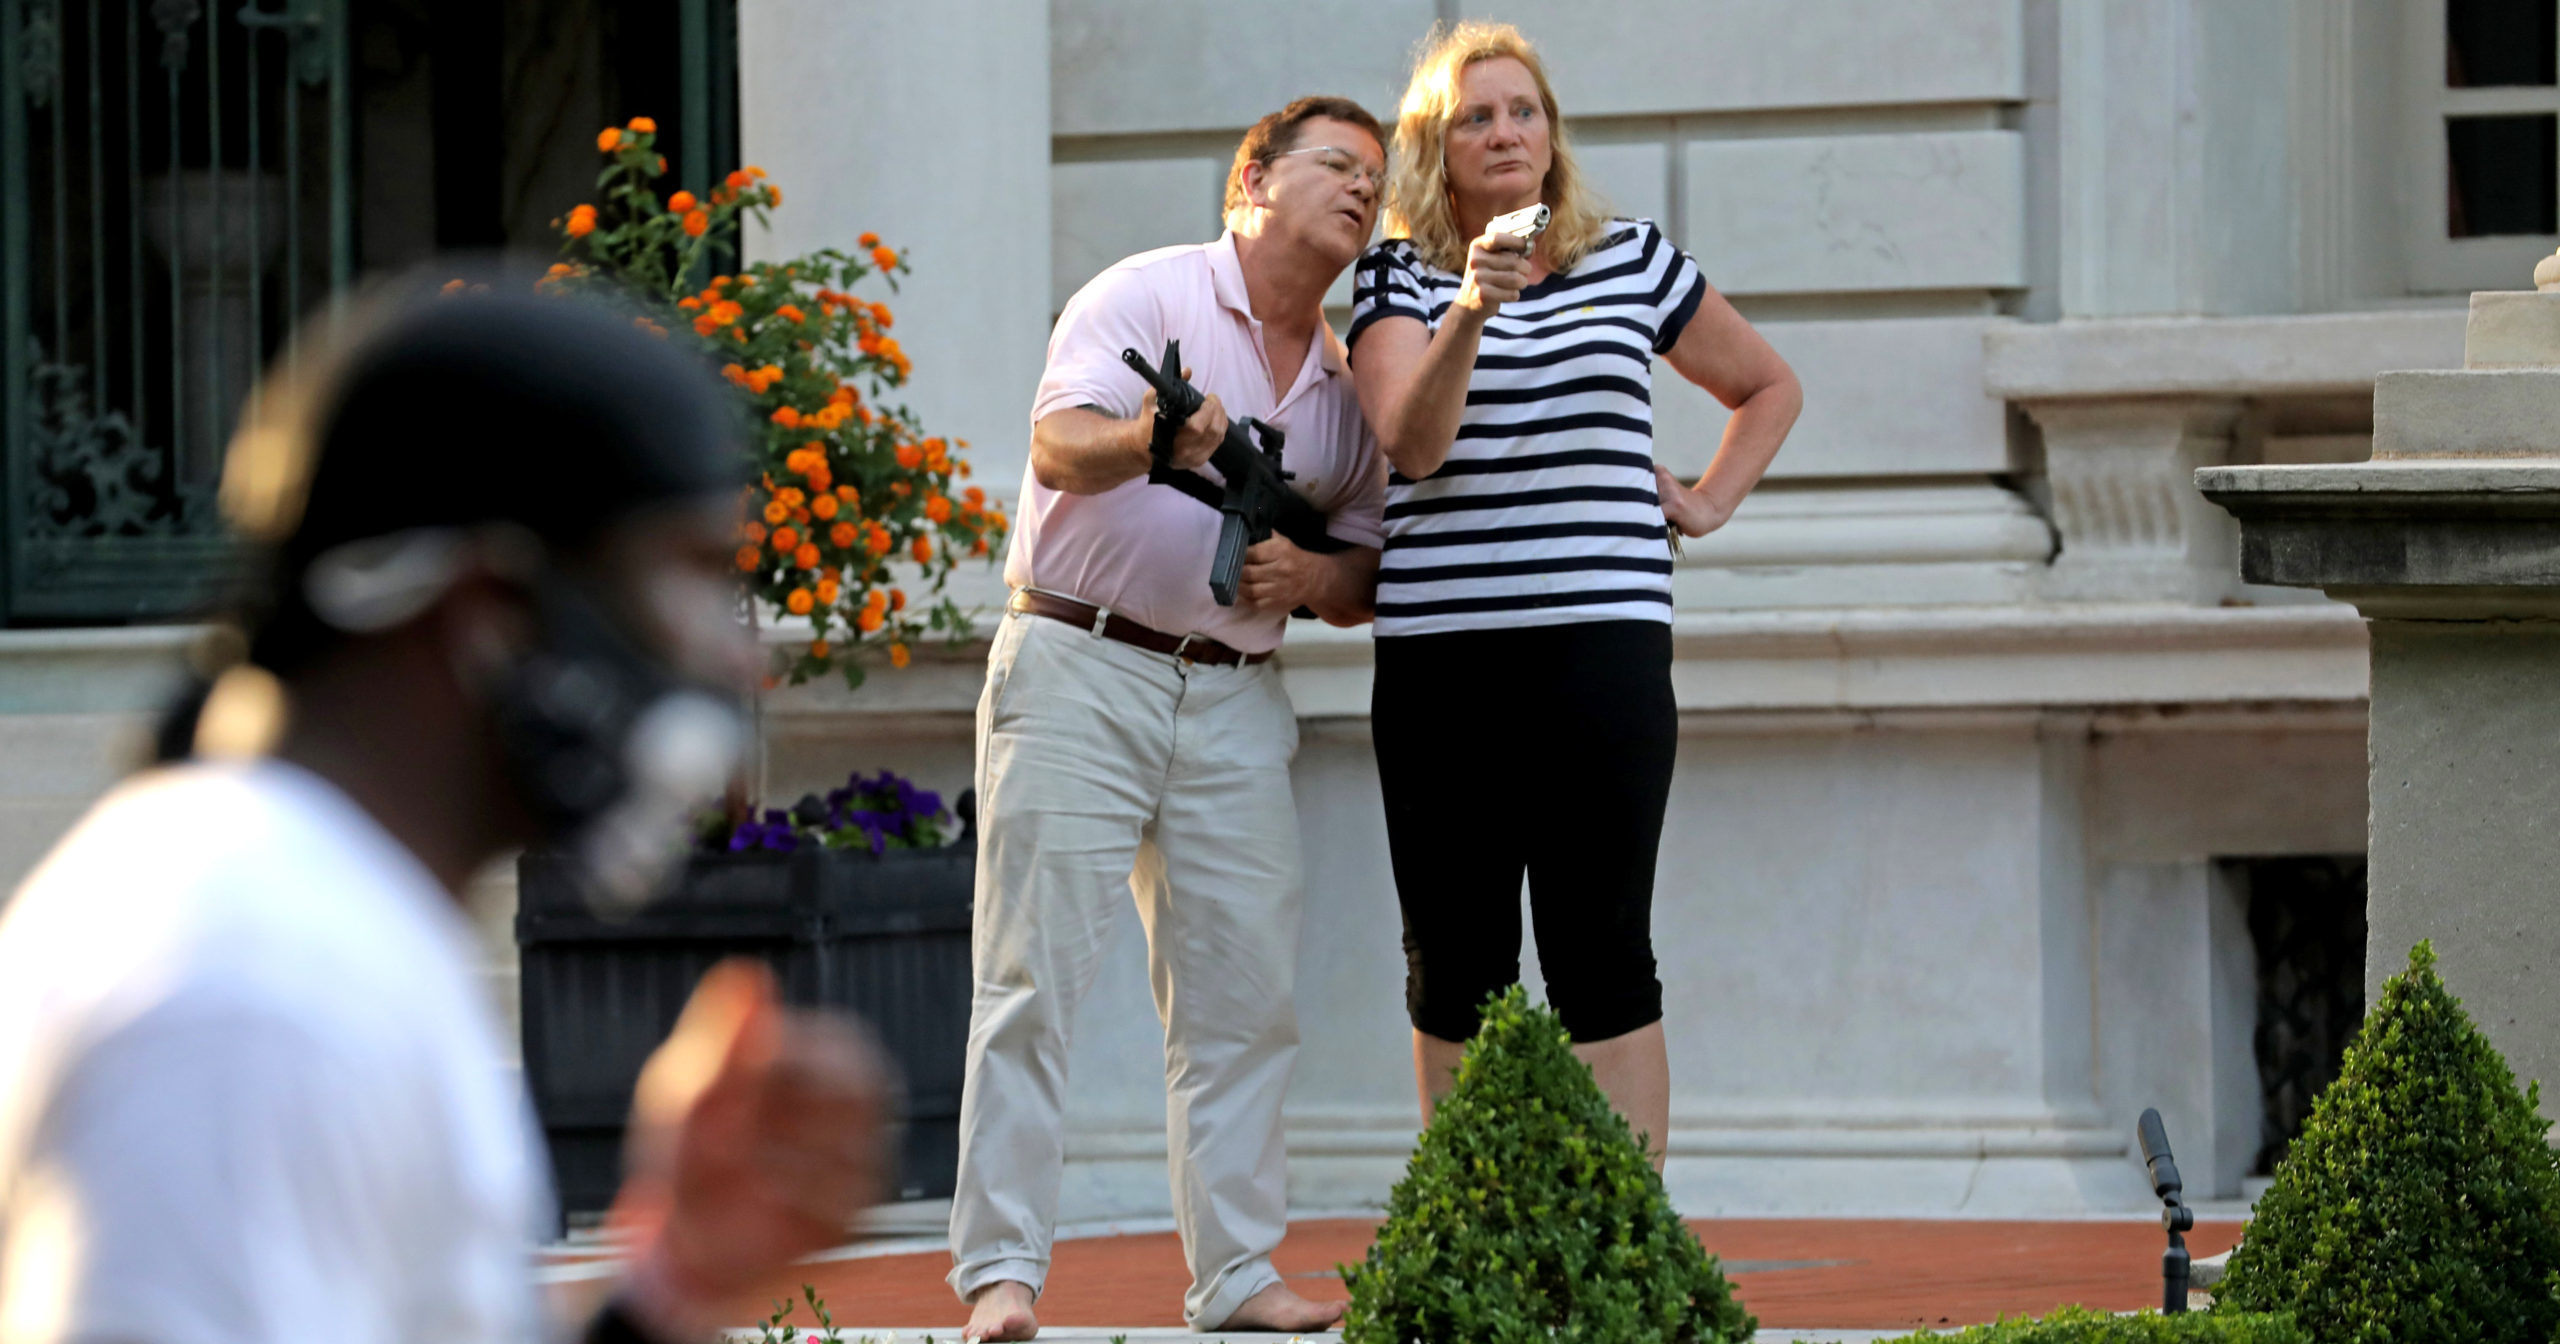 In this June 28, 2020, file photo, armed homeowners Mark and Patricia McCloskey confront protesters outside their home in St. Louis. President Donald Trump believes St. Louis’ top prosecutor committed an “egregious abuse of power” in charging the couple, White House press secretary Kayleigh McEnany said on July 21.